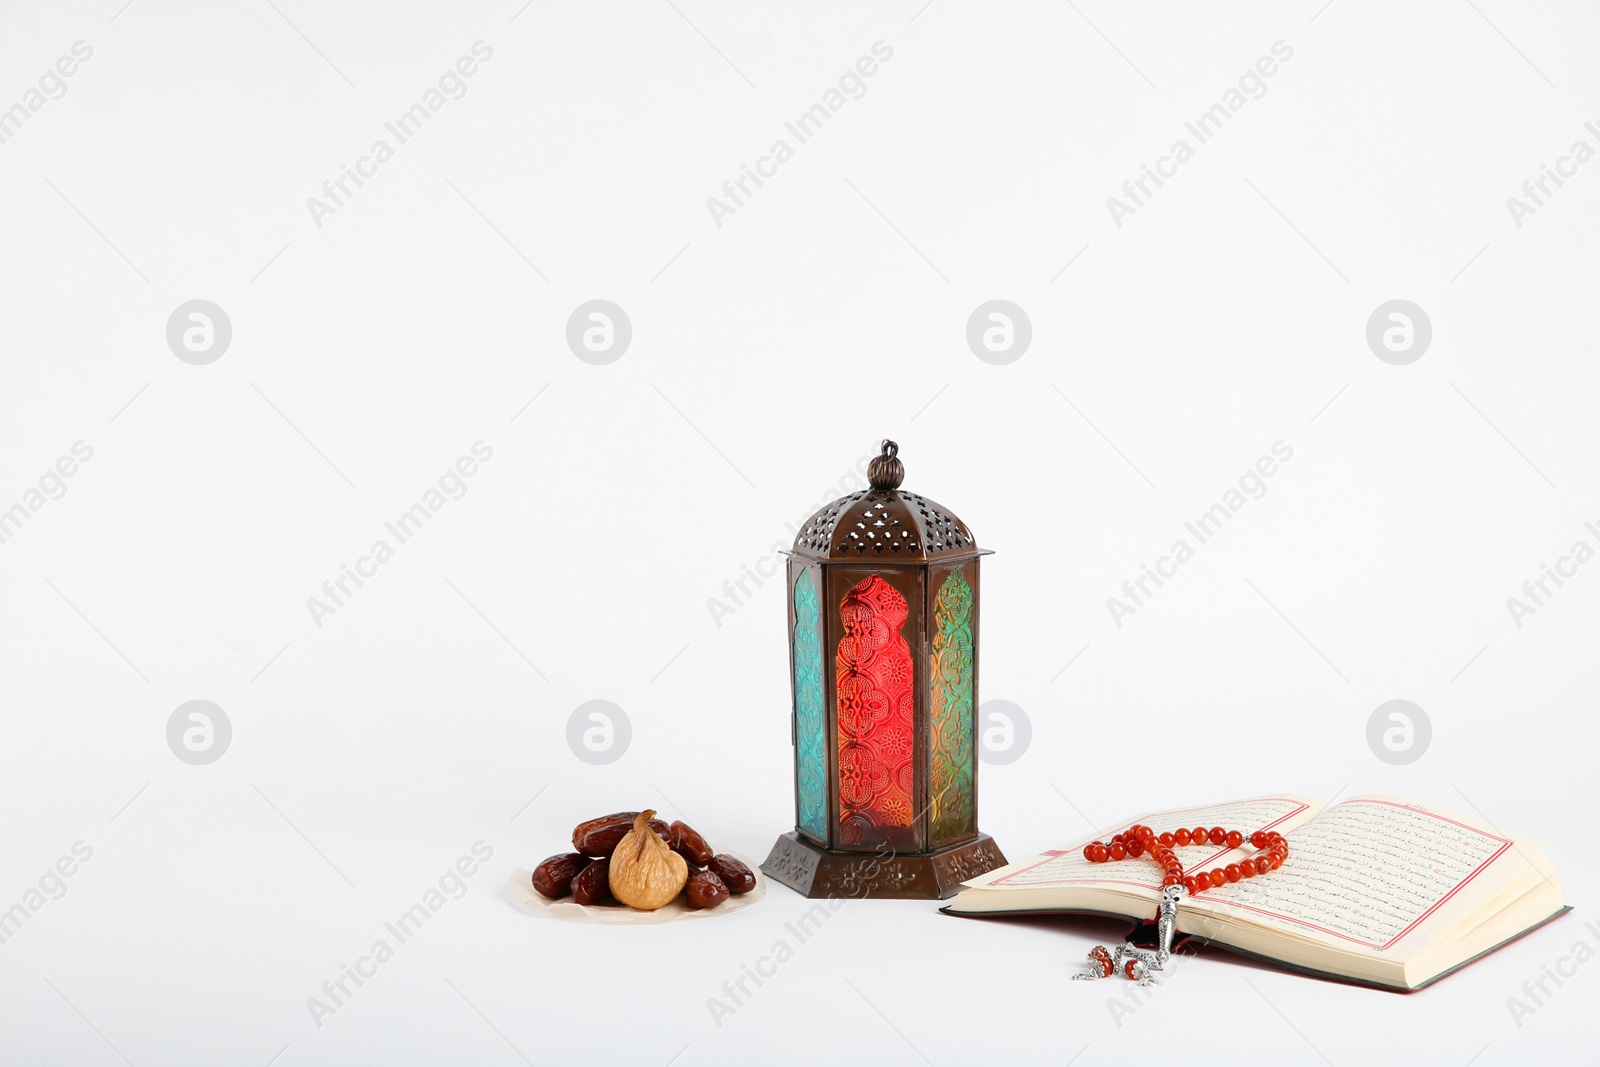 Photo of Muslim lamp, dates, Koran and prayer beads on white background. Space for text